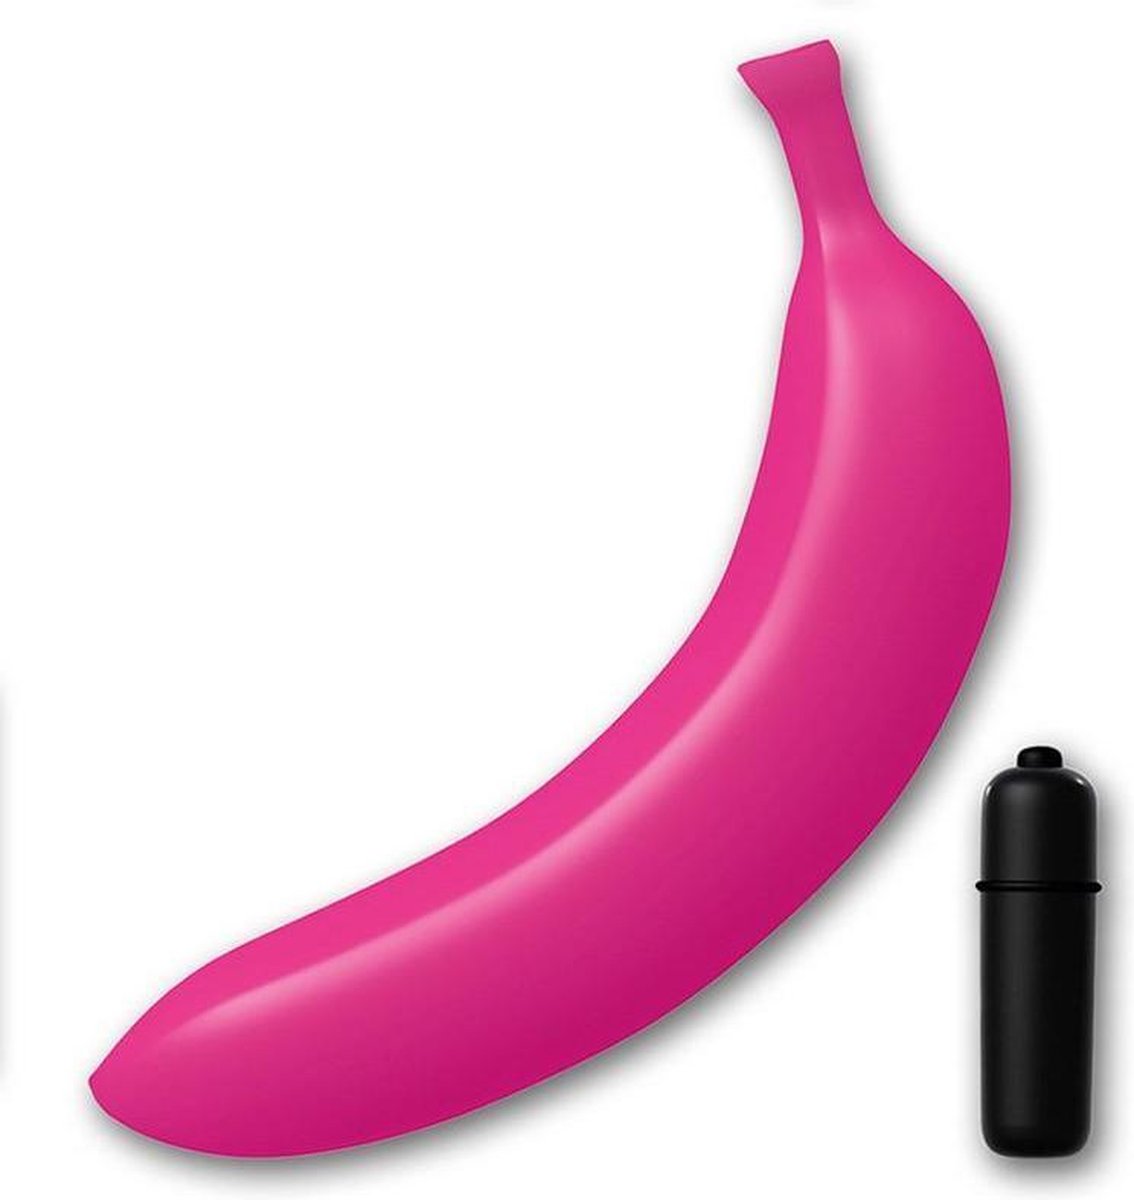 A bright pink banana-shaped dildo is pictured next to a small black bullet vibrator.